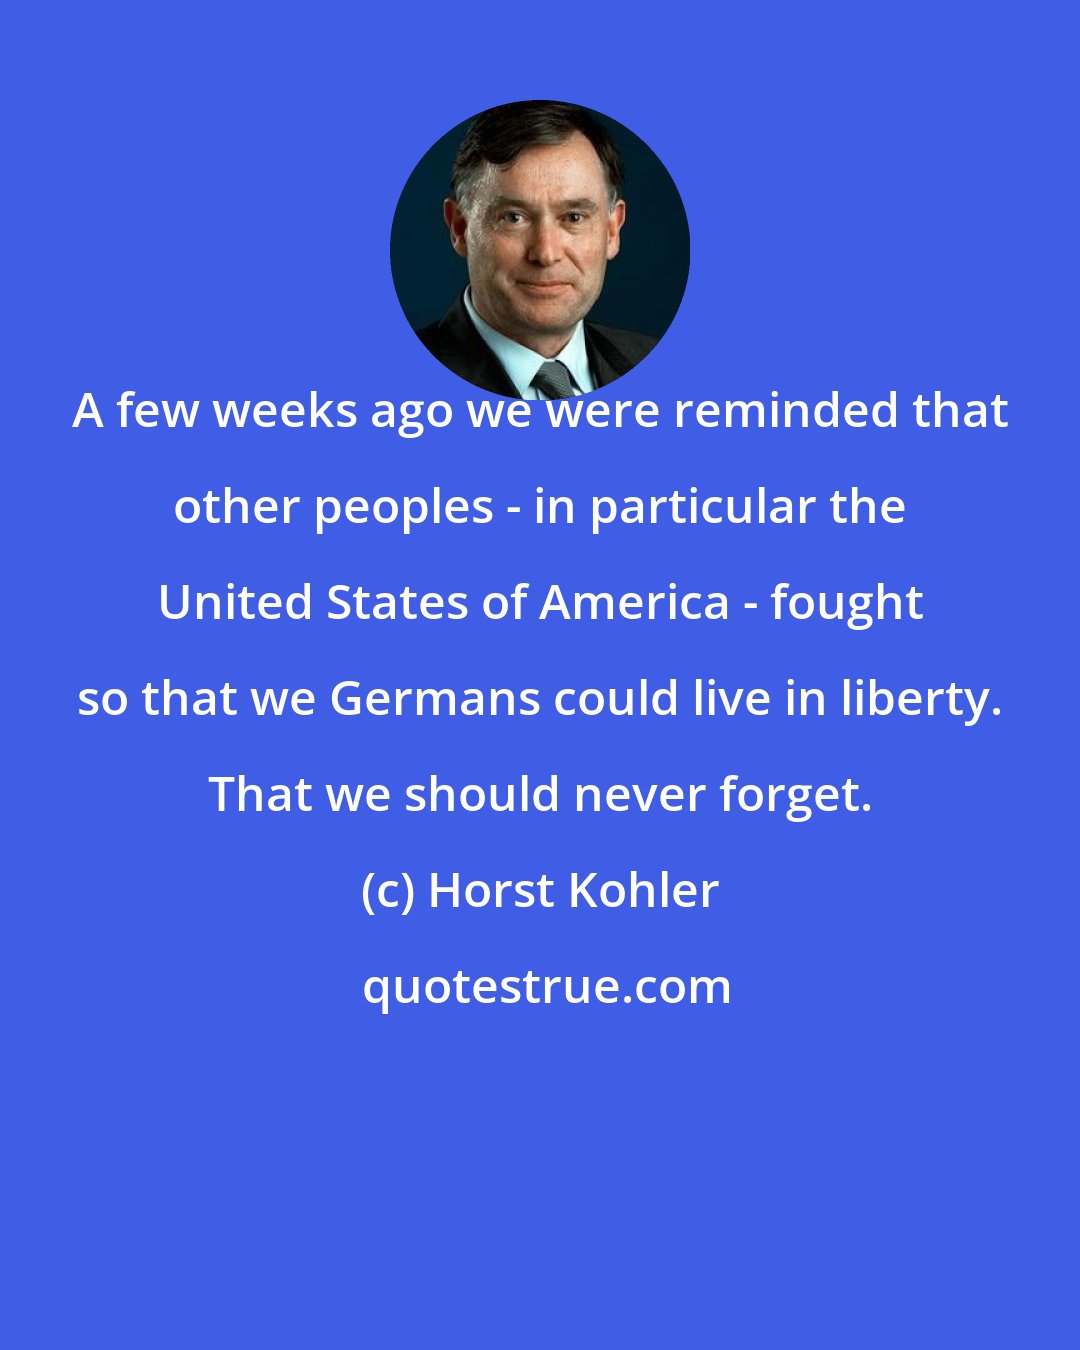 Horst Kohler: A few weeks ago we were reminded that other peoples - in particular the United States of America - fought so that we Germans could live in liberty. That we should never forget.